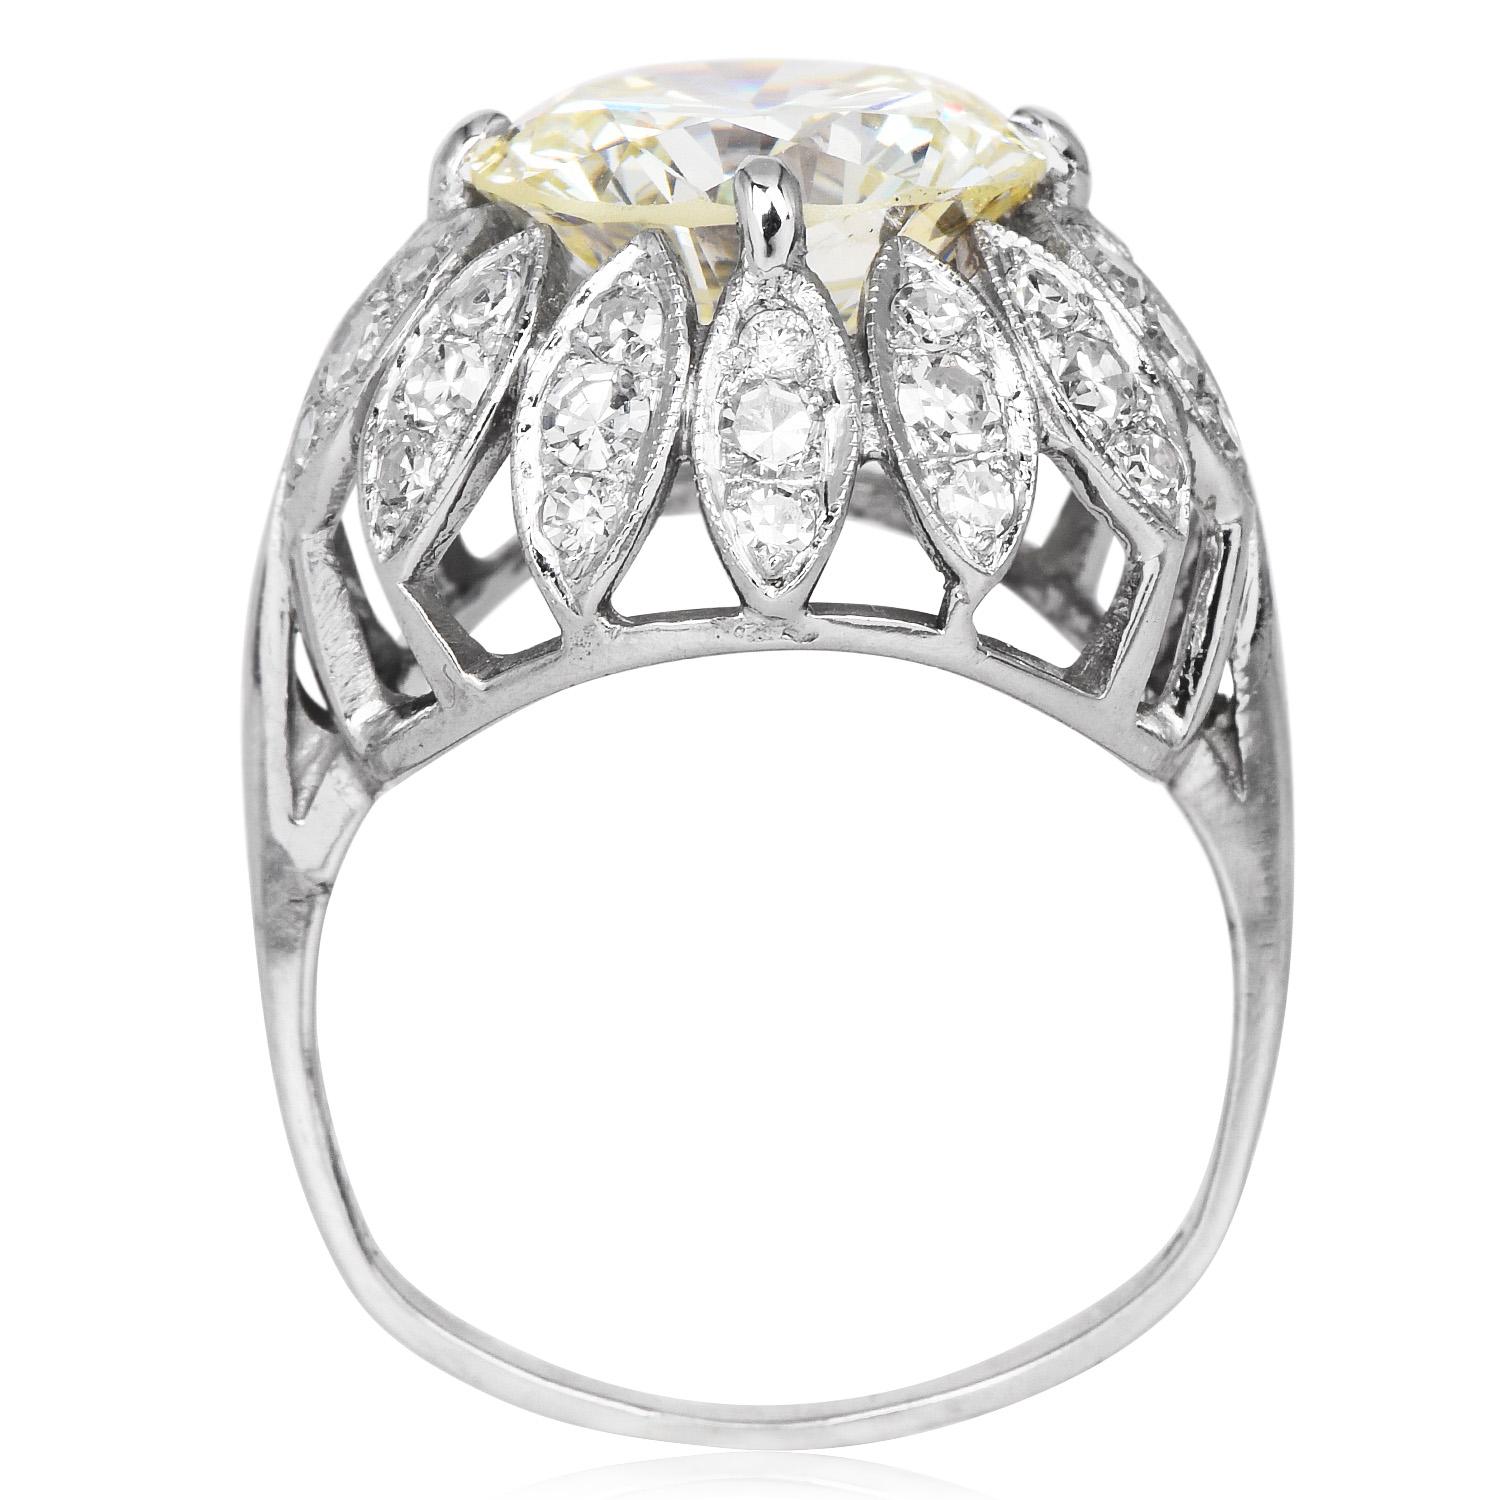 Vintage 5.81 Ct Diamond 18K White Gold Floral Cocktail Engagement Ring In Excellent Condition For Sale In Miami, FL